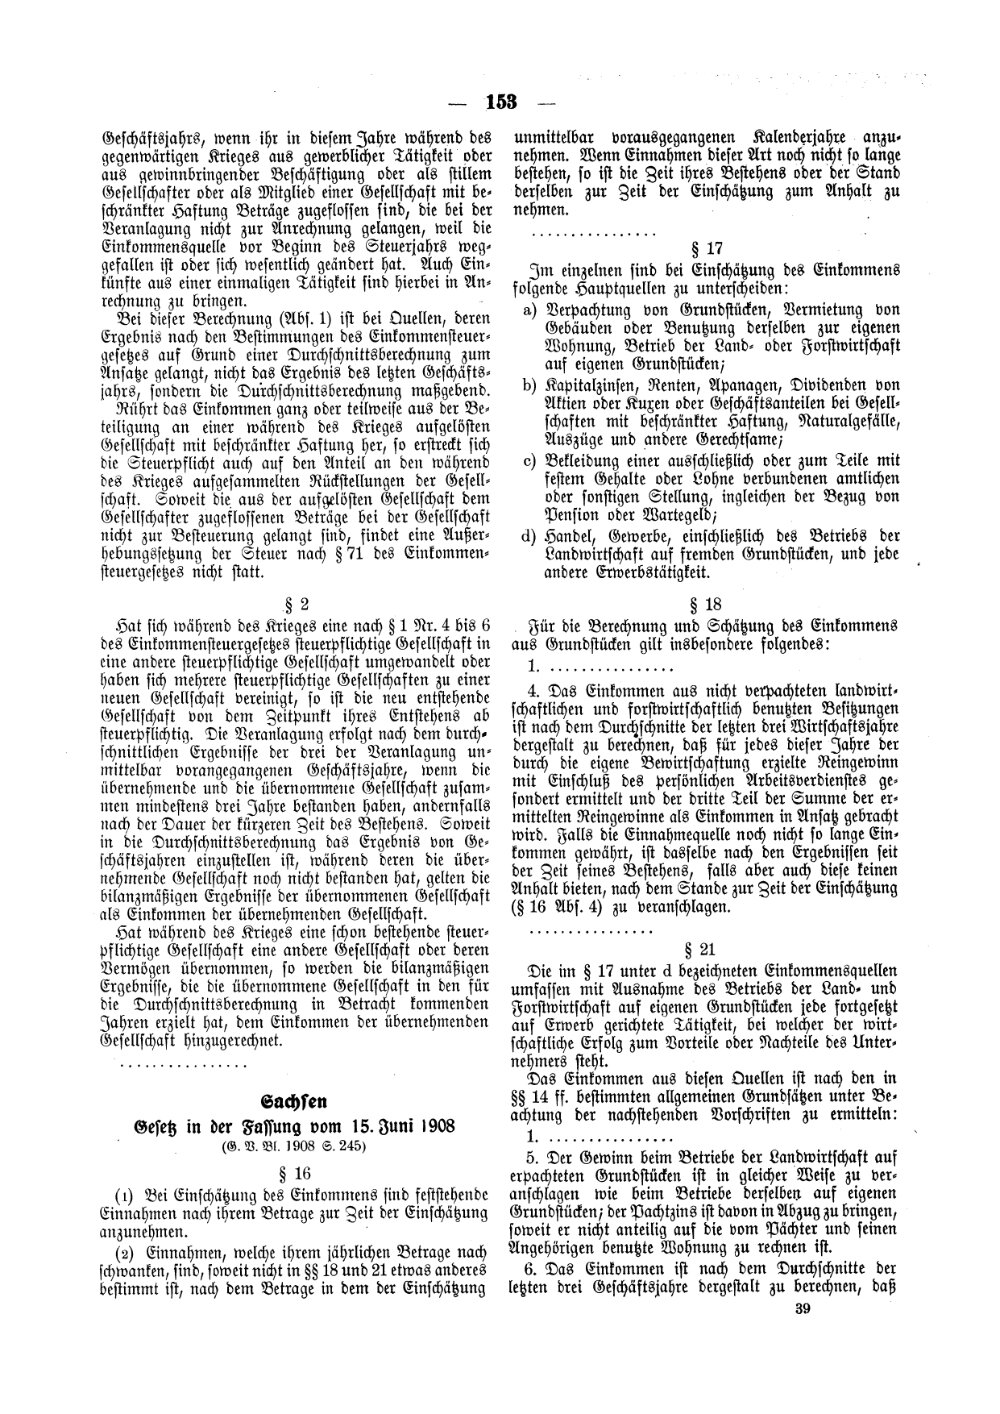 Scan of page 153